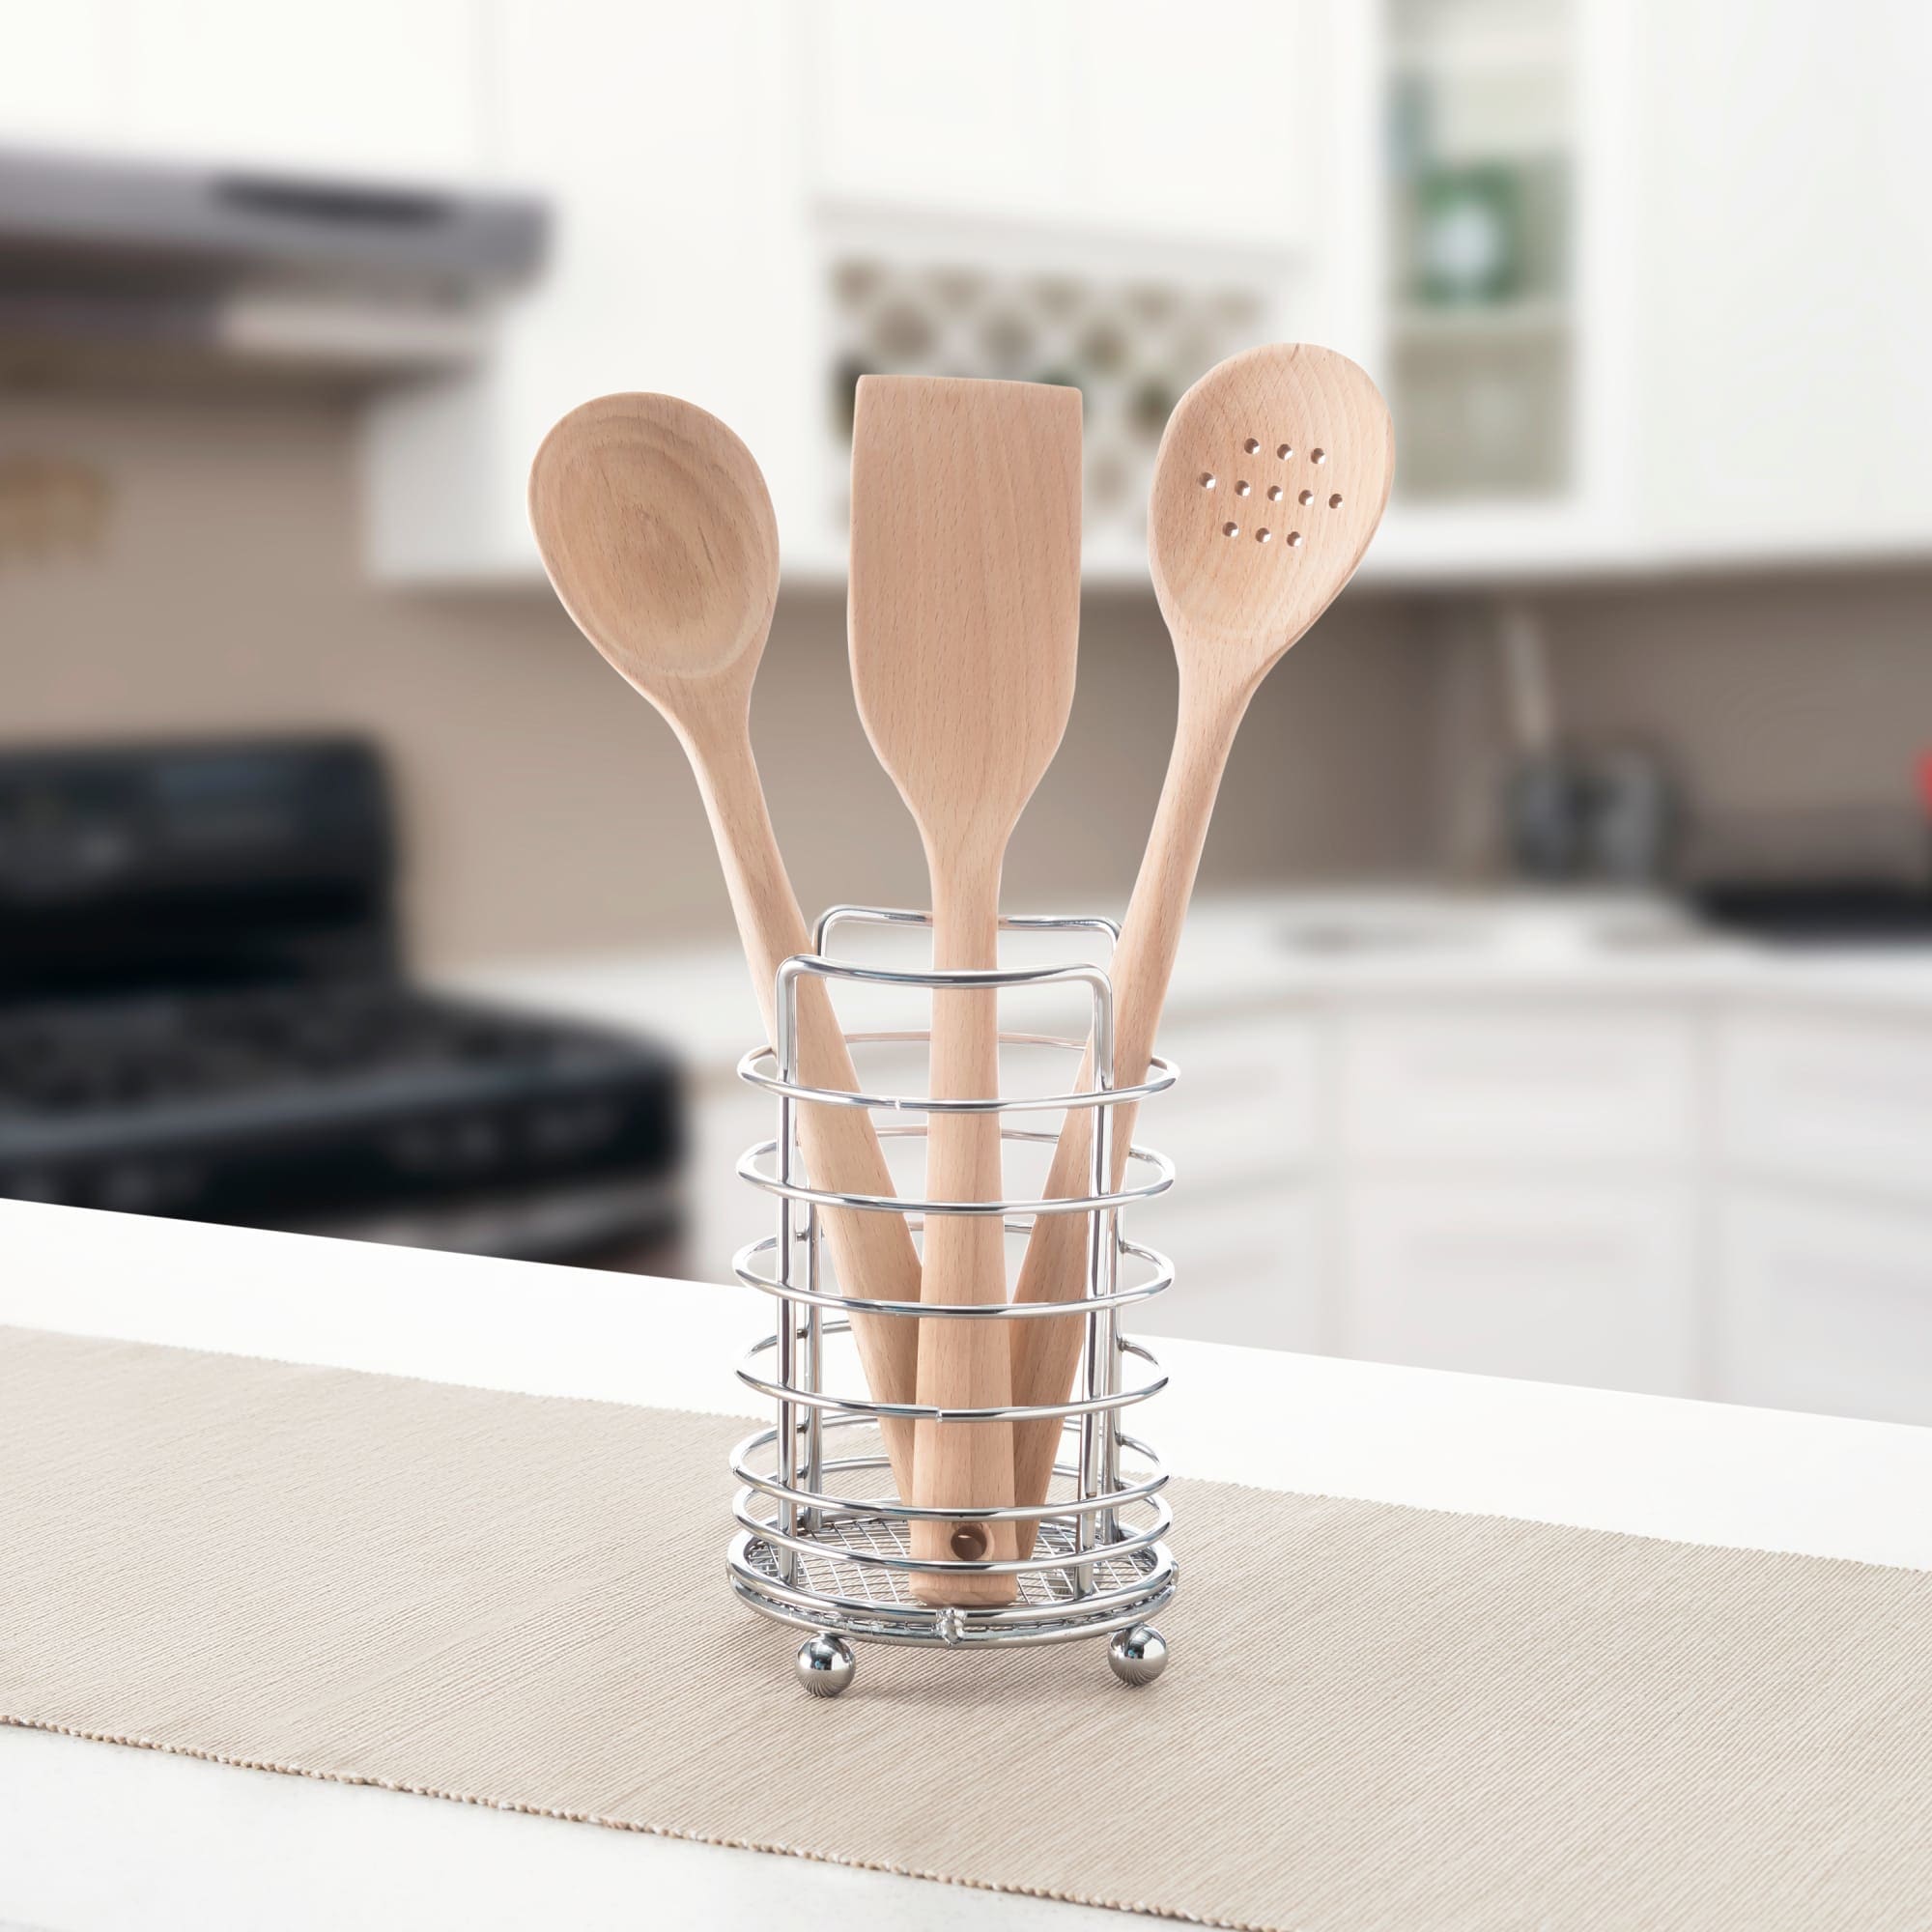 Home Basics Wire Collection Cutlery Holder, Chrome $5 EACH, CASE PACK OF 24